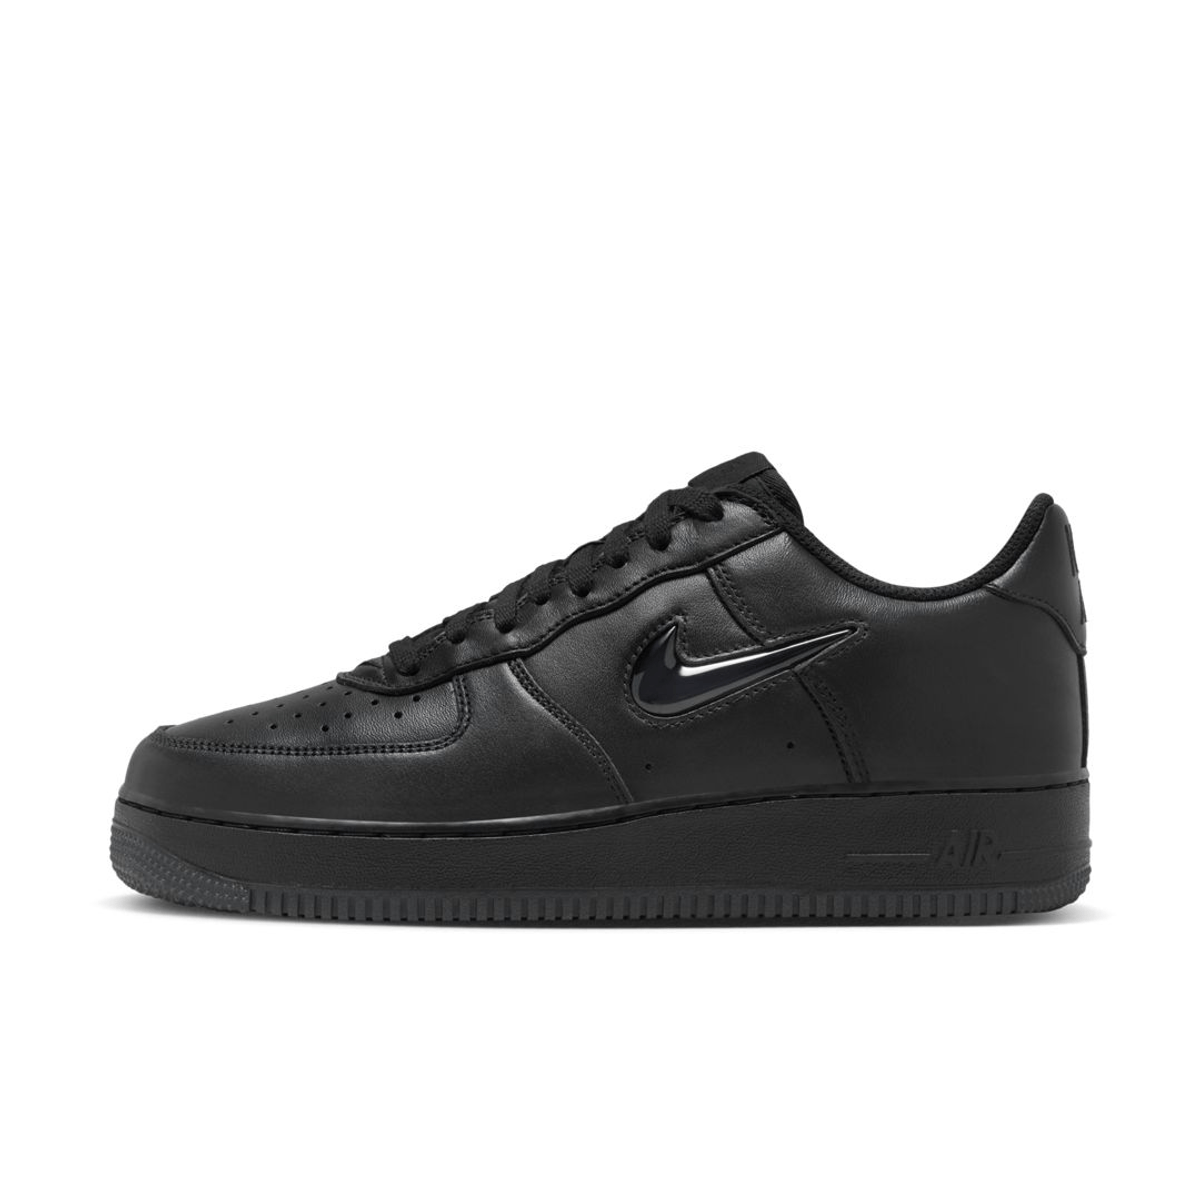 Official Images Of The Nike Air Force 1 Low "Black Jewel"